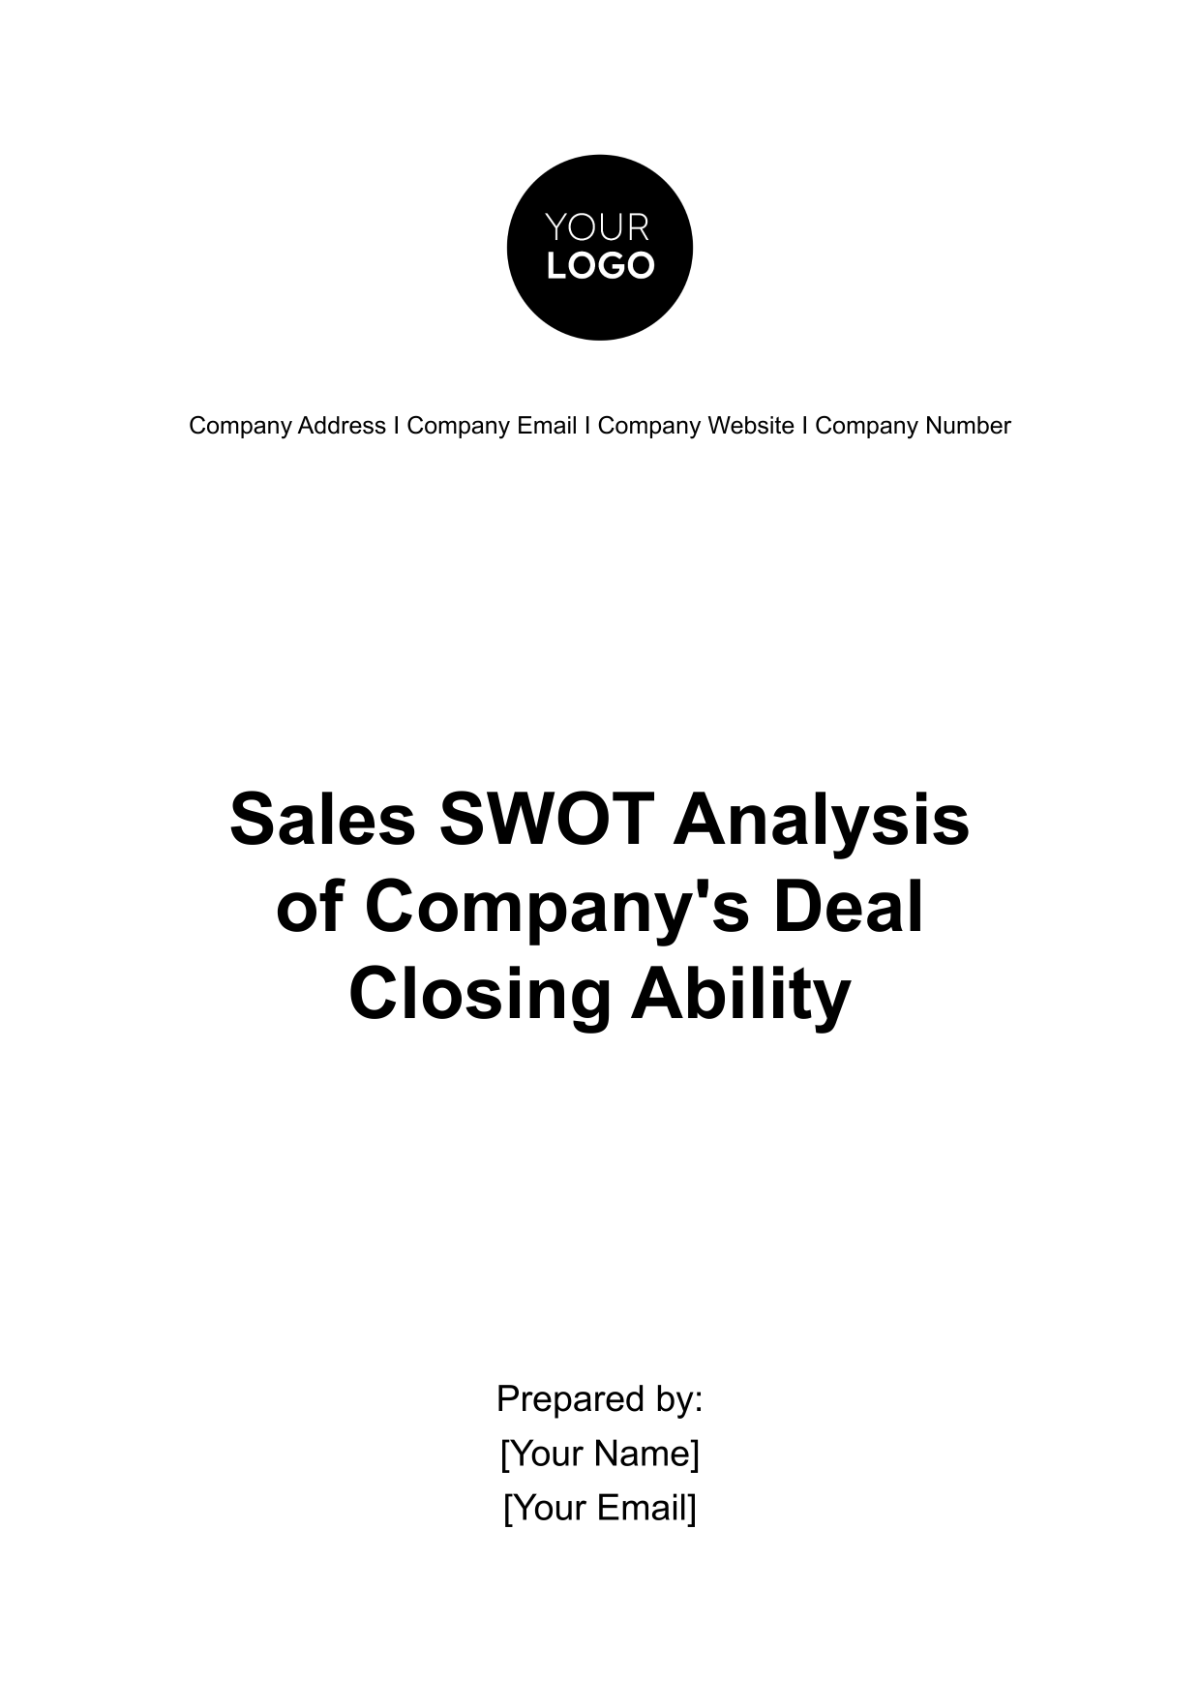 Free Sales SWOT Analysis of Company's Deal Closing Ability Template